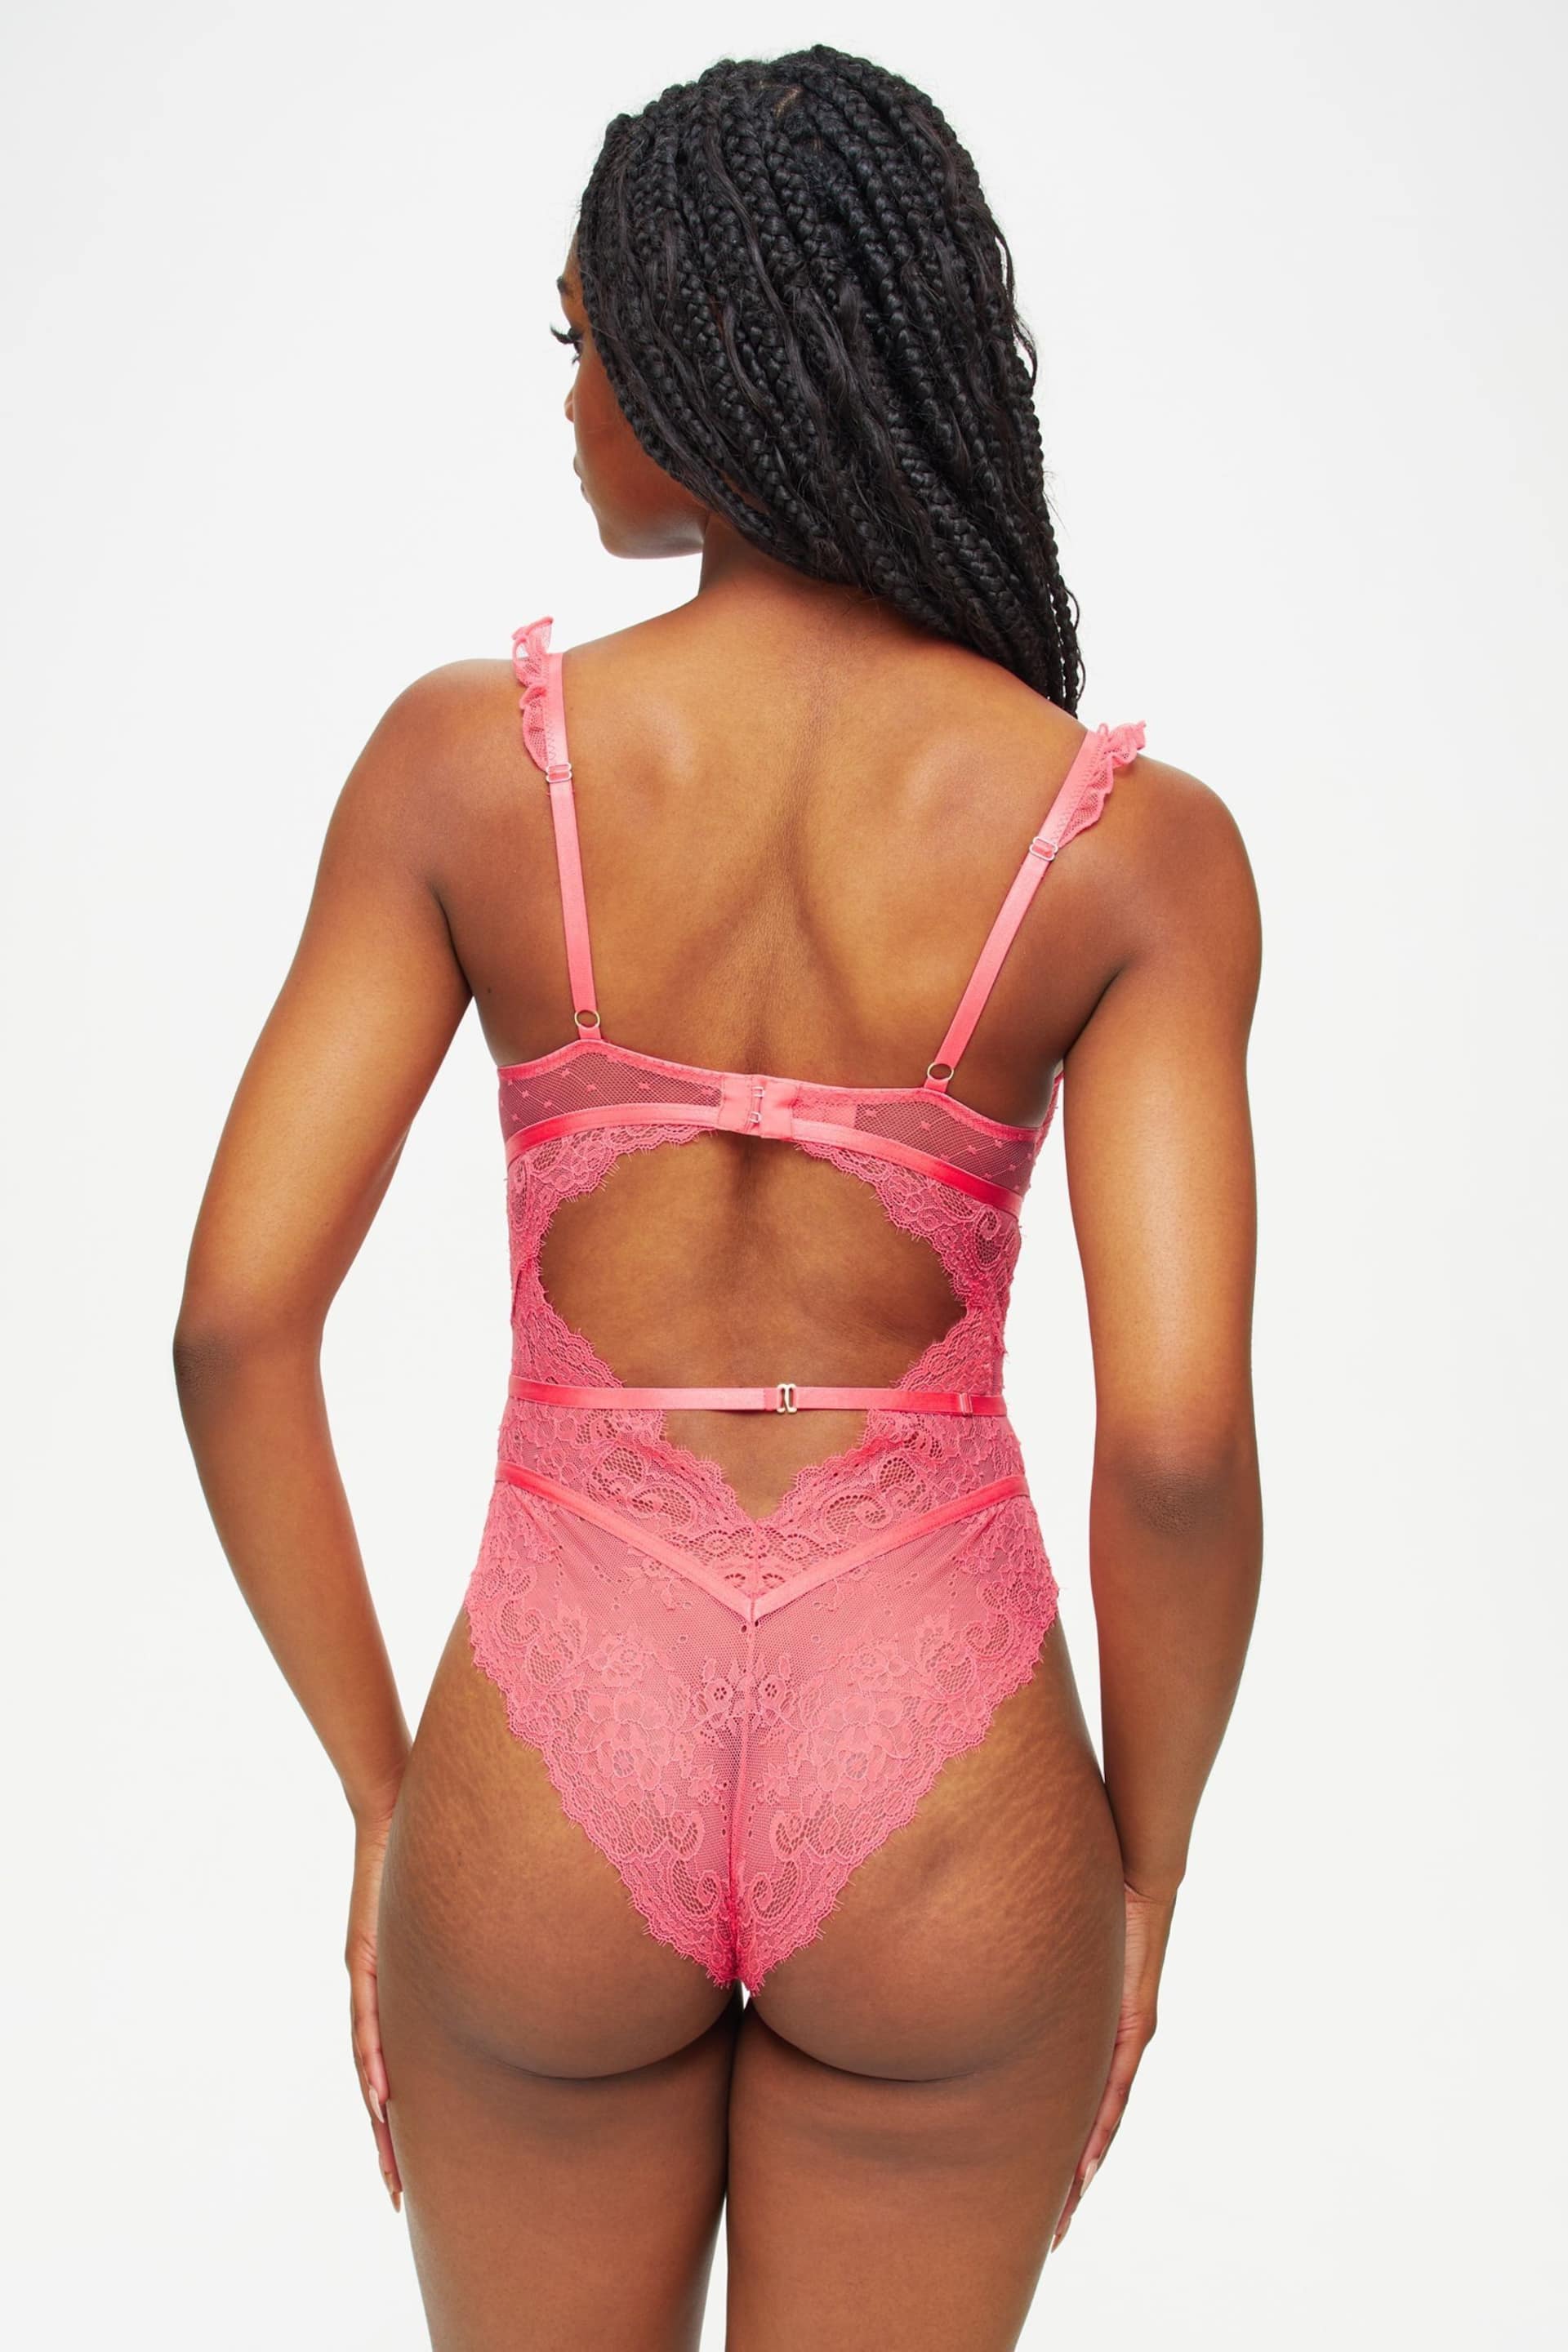 Ann Summers Pink Sweetheart Lace Body - Image 3 of 5